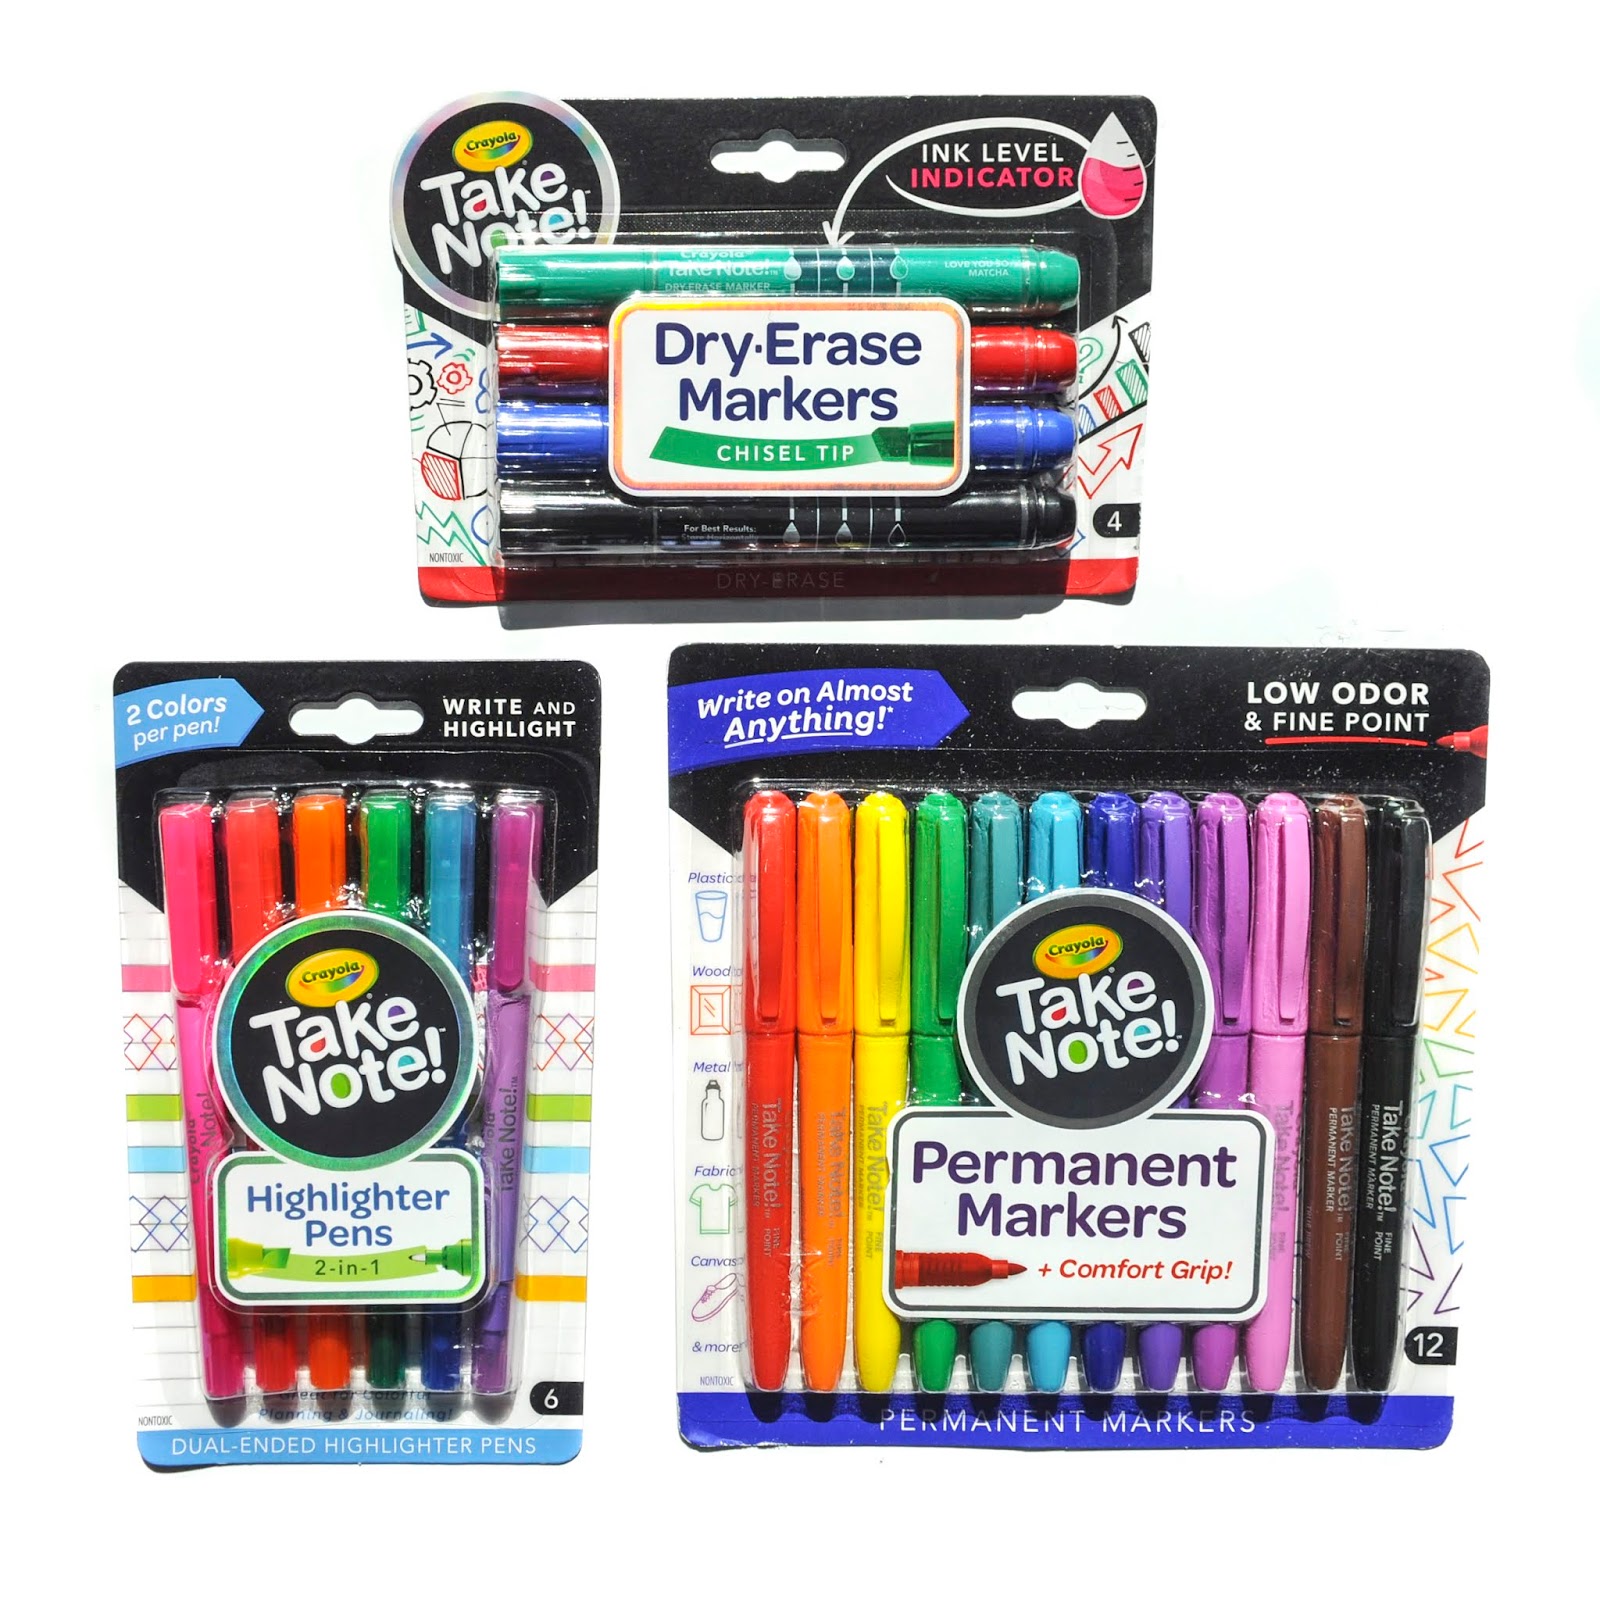 Take Note Permanent Markers, Highlighter Pens, and Dry-Erase Markers